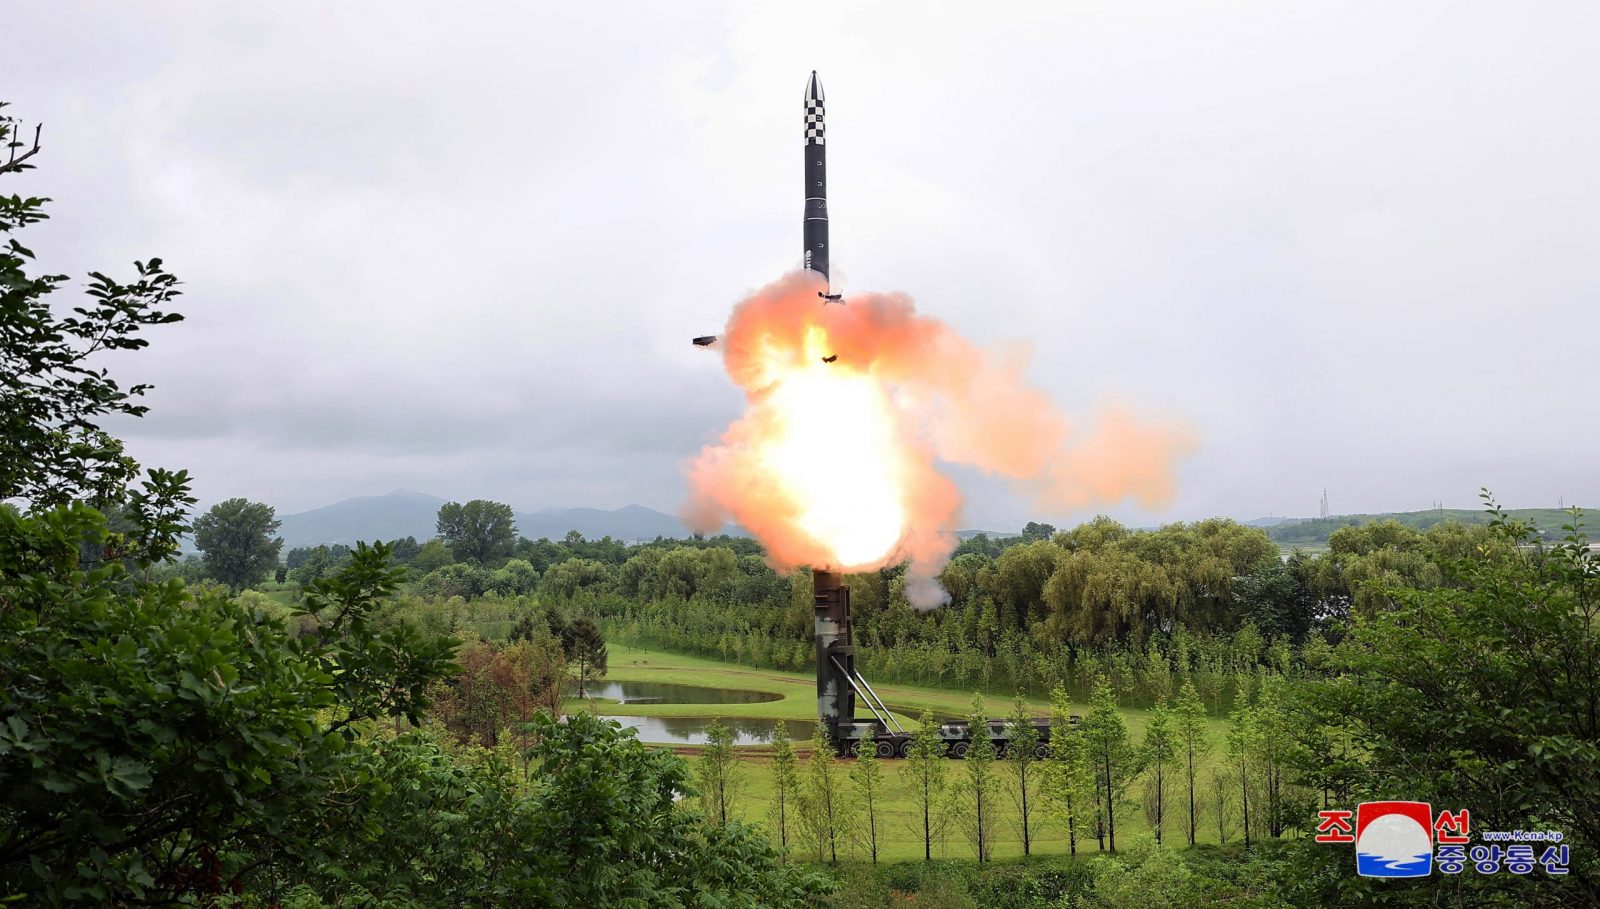 epa10742747 A photo released by the official North Korean Central News Agency (KCNA) shows the test-firing of a Hwasong-18 solid-fuel intercontinental ballistic missile (ICBM), at an undisclosed location in North Korea, 12 July 2023 (issued 13 July 2023). According to KCNA, the missile travelled at a maximum altitude of 6,648.4 kilometres and flew a distance of 1,001.2 kilometres for 4,491 seconds before landing in the open waters off the East Sea of Korea.  EPA/KCNA   EDITORIAL USE ONLY